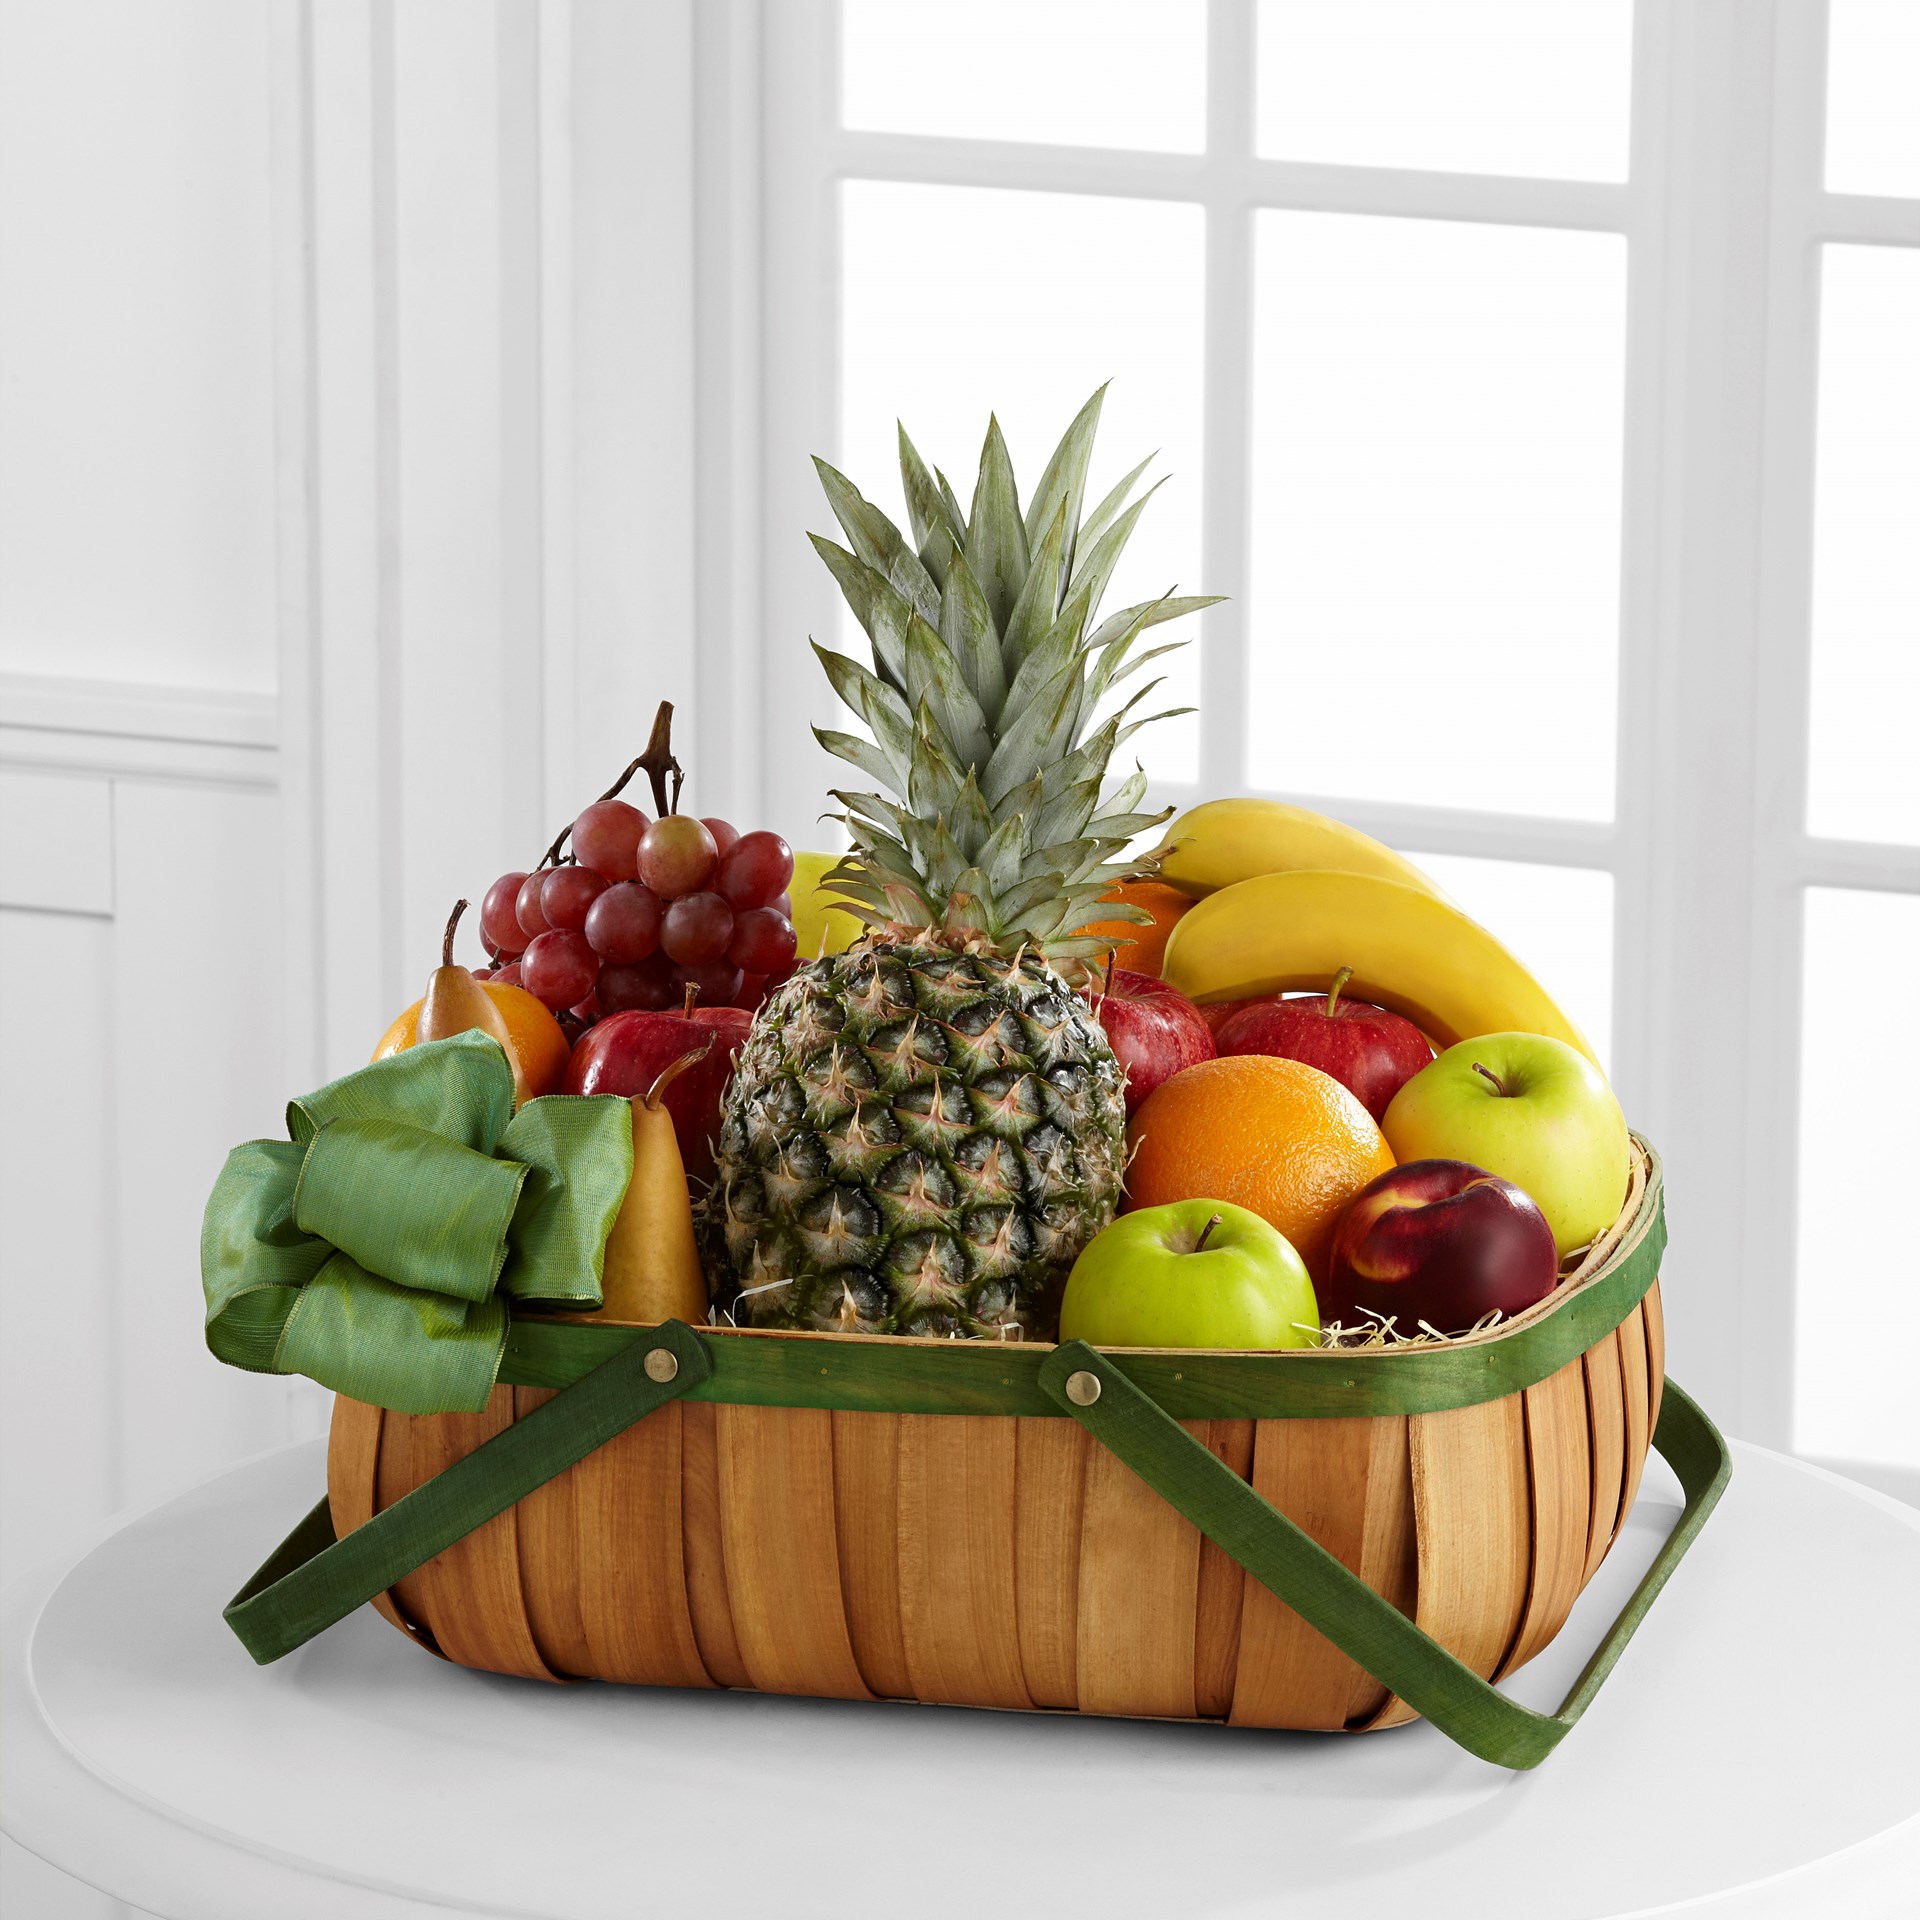 product image for The FTD Thoughtful Gesture Fruit Basket